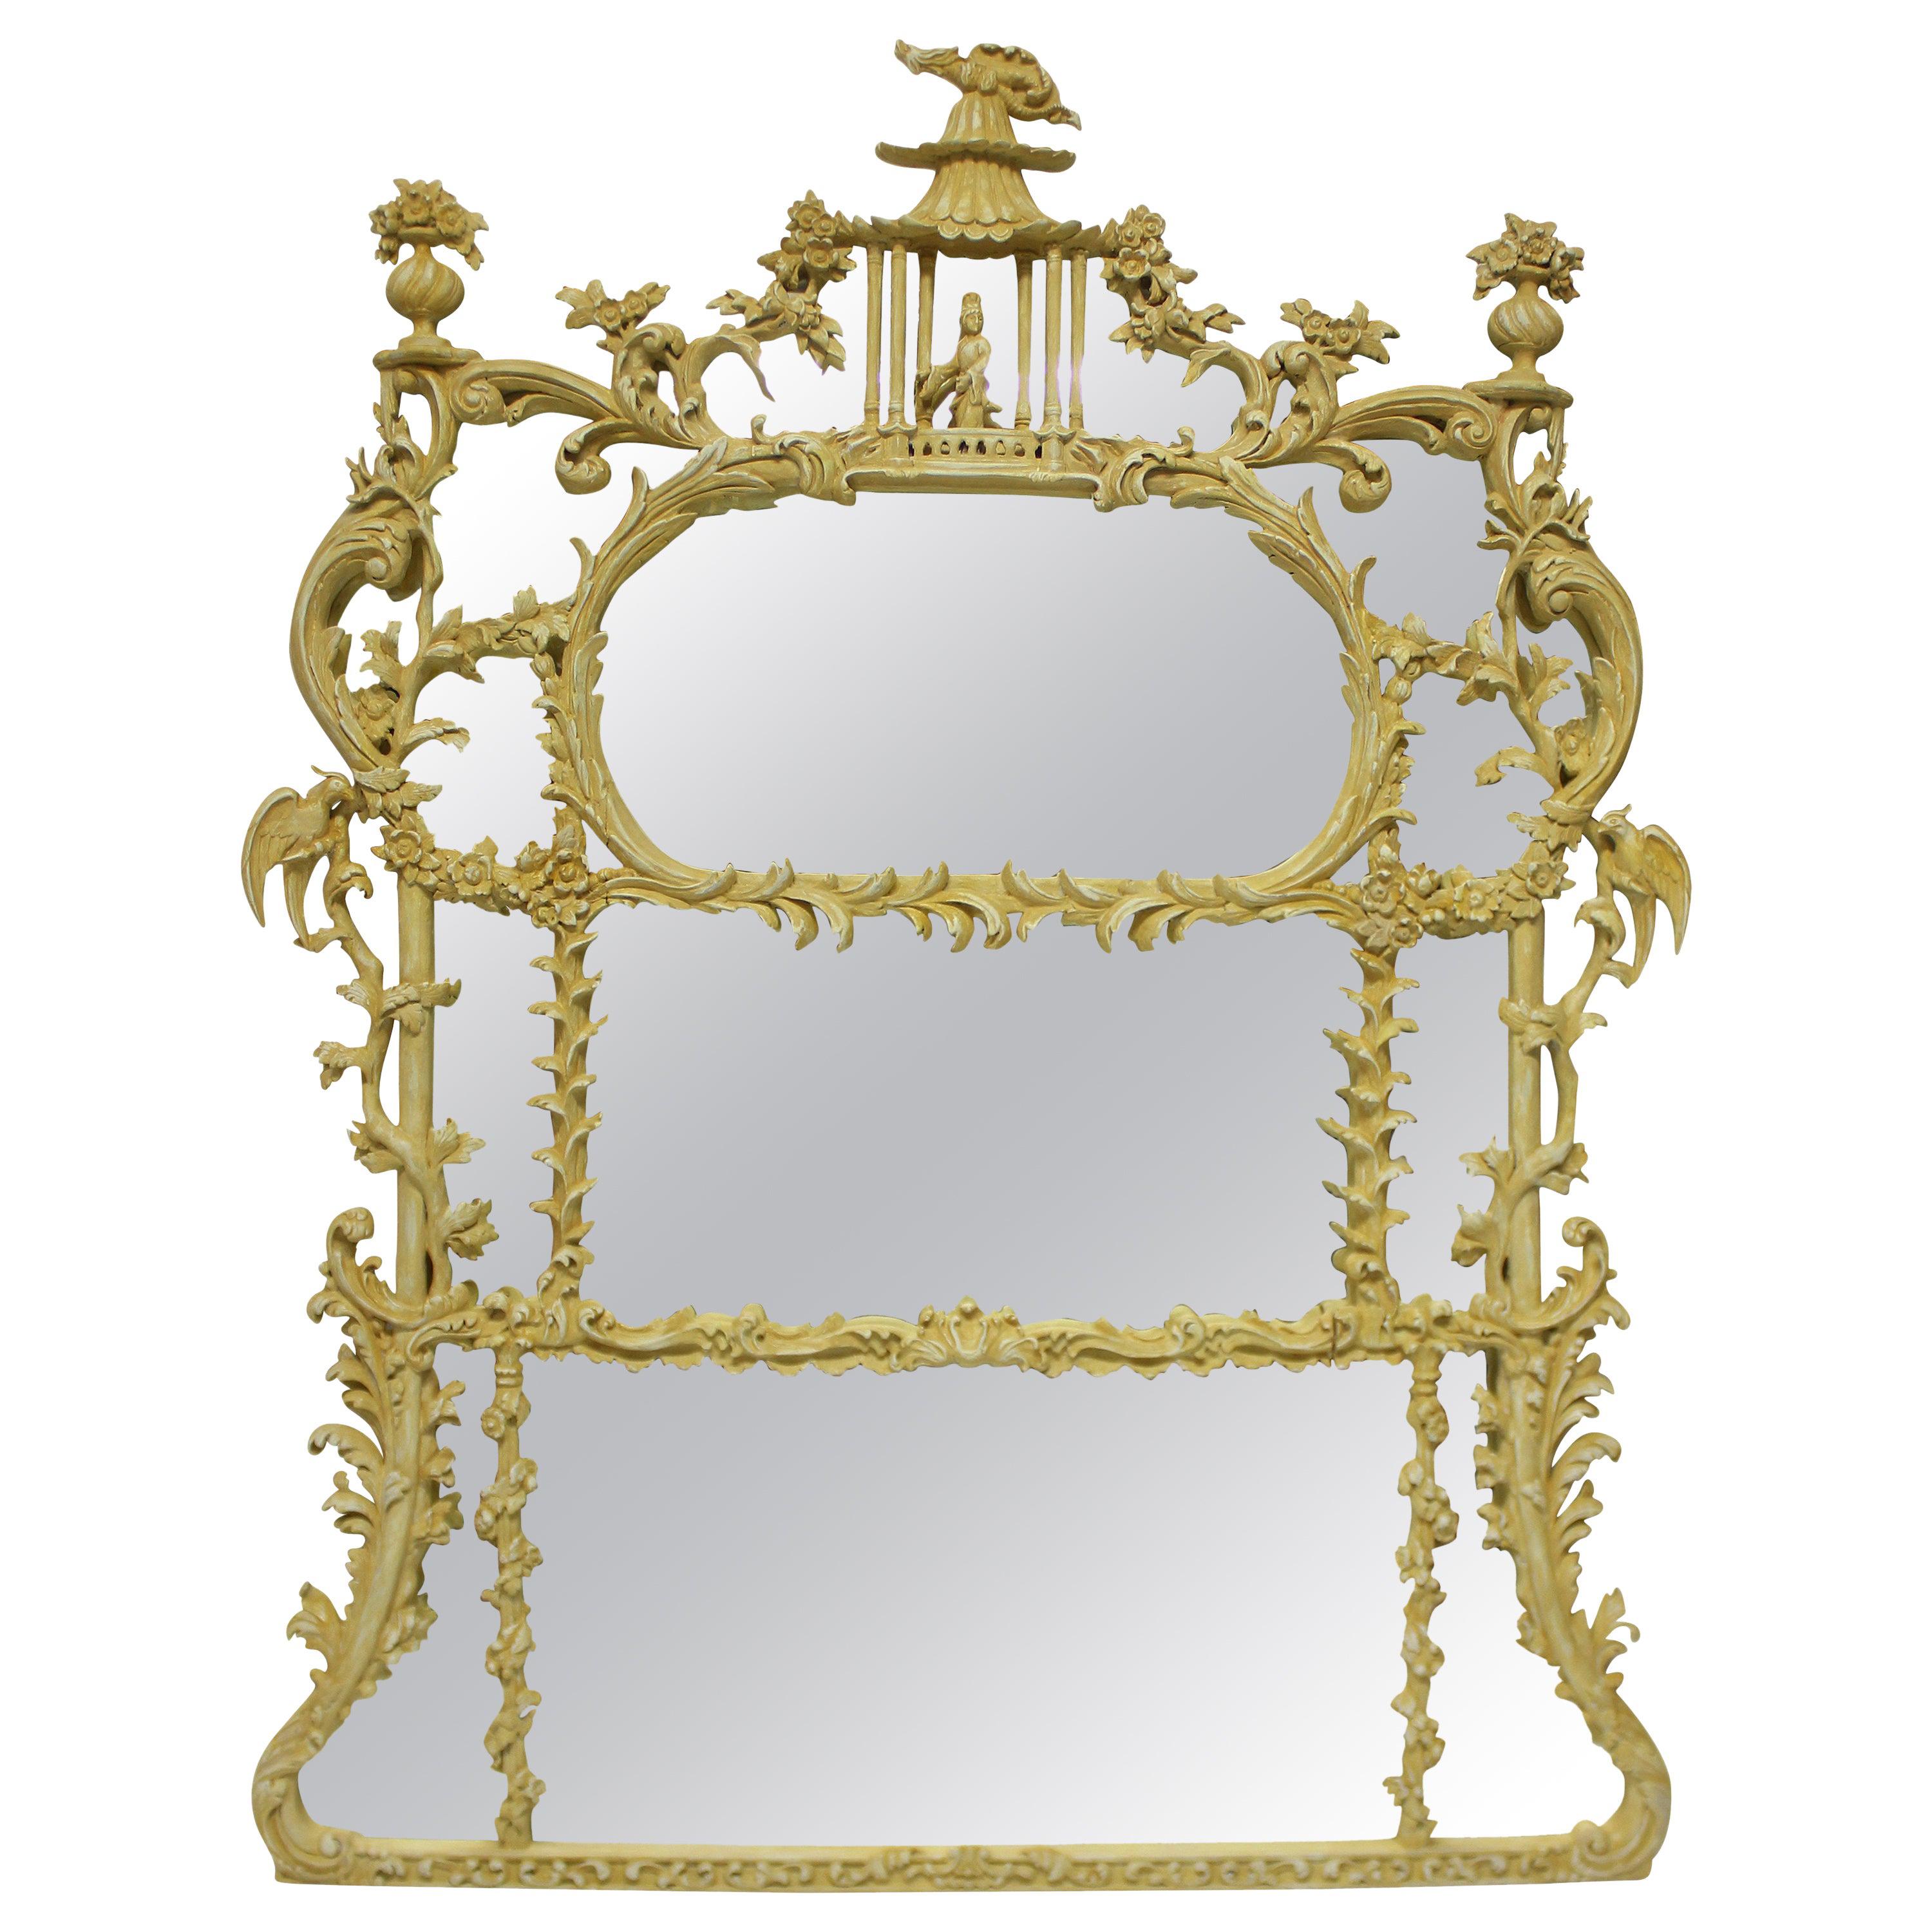 Chinese Chippendale Revival Overmantel Mirror